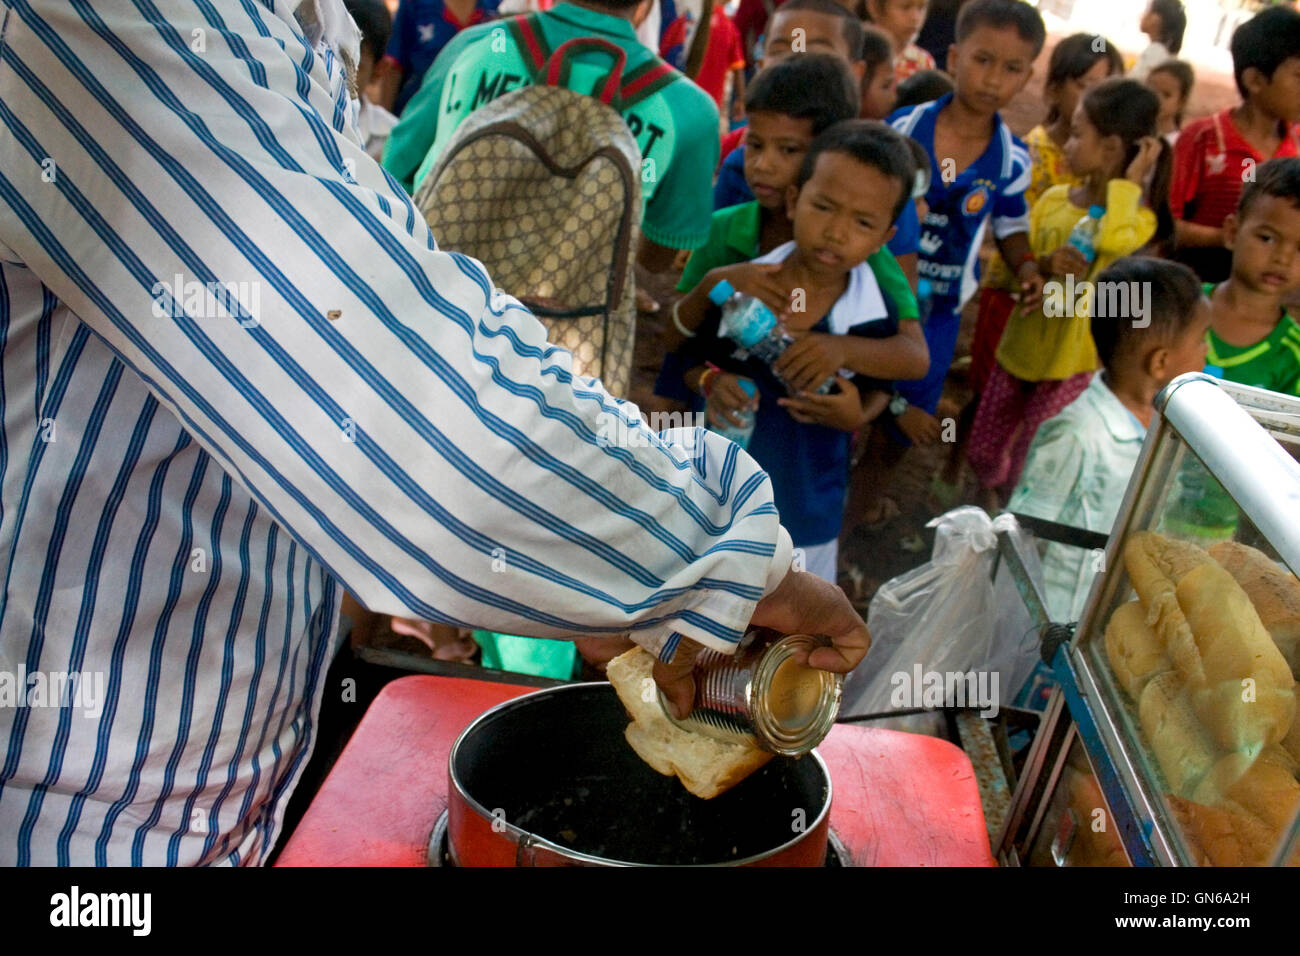 A vendor is pouring sweetened condensed beverage creamer on bread as a group of young Cambodian students await their snacks in Stock Photo